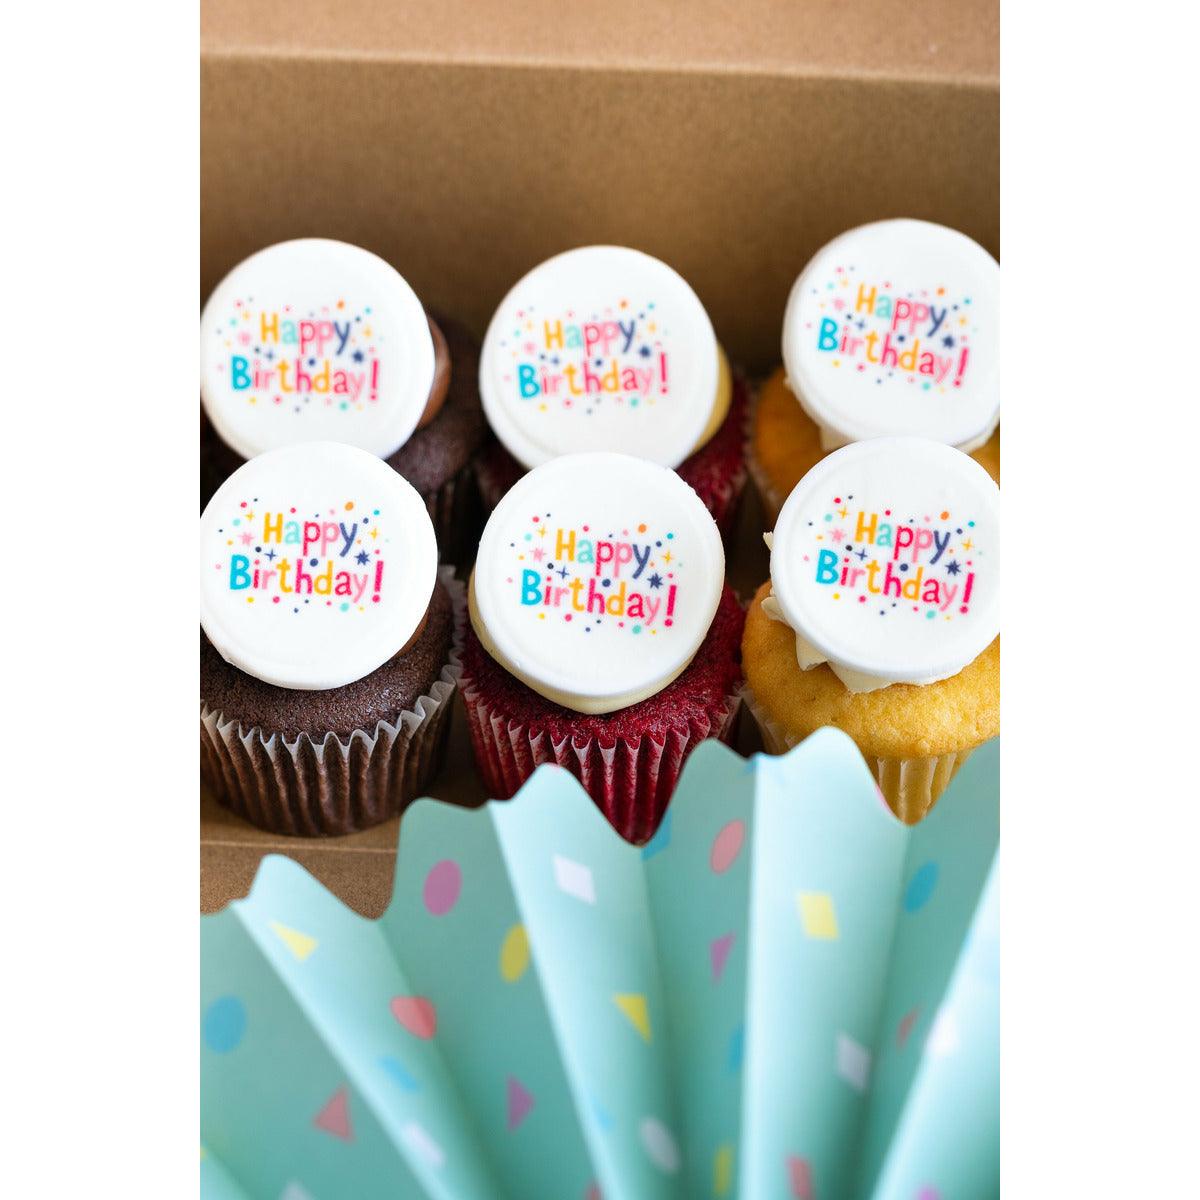 Happy Birthday Theme 1 Cupcakes by Little Cupcakes Melbourne